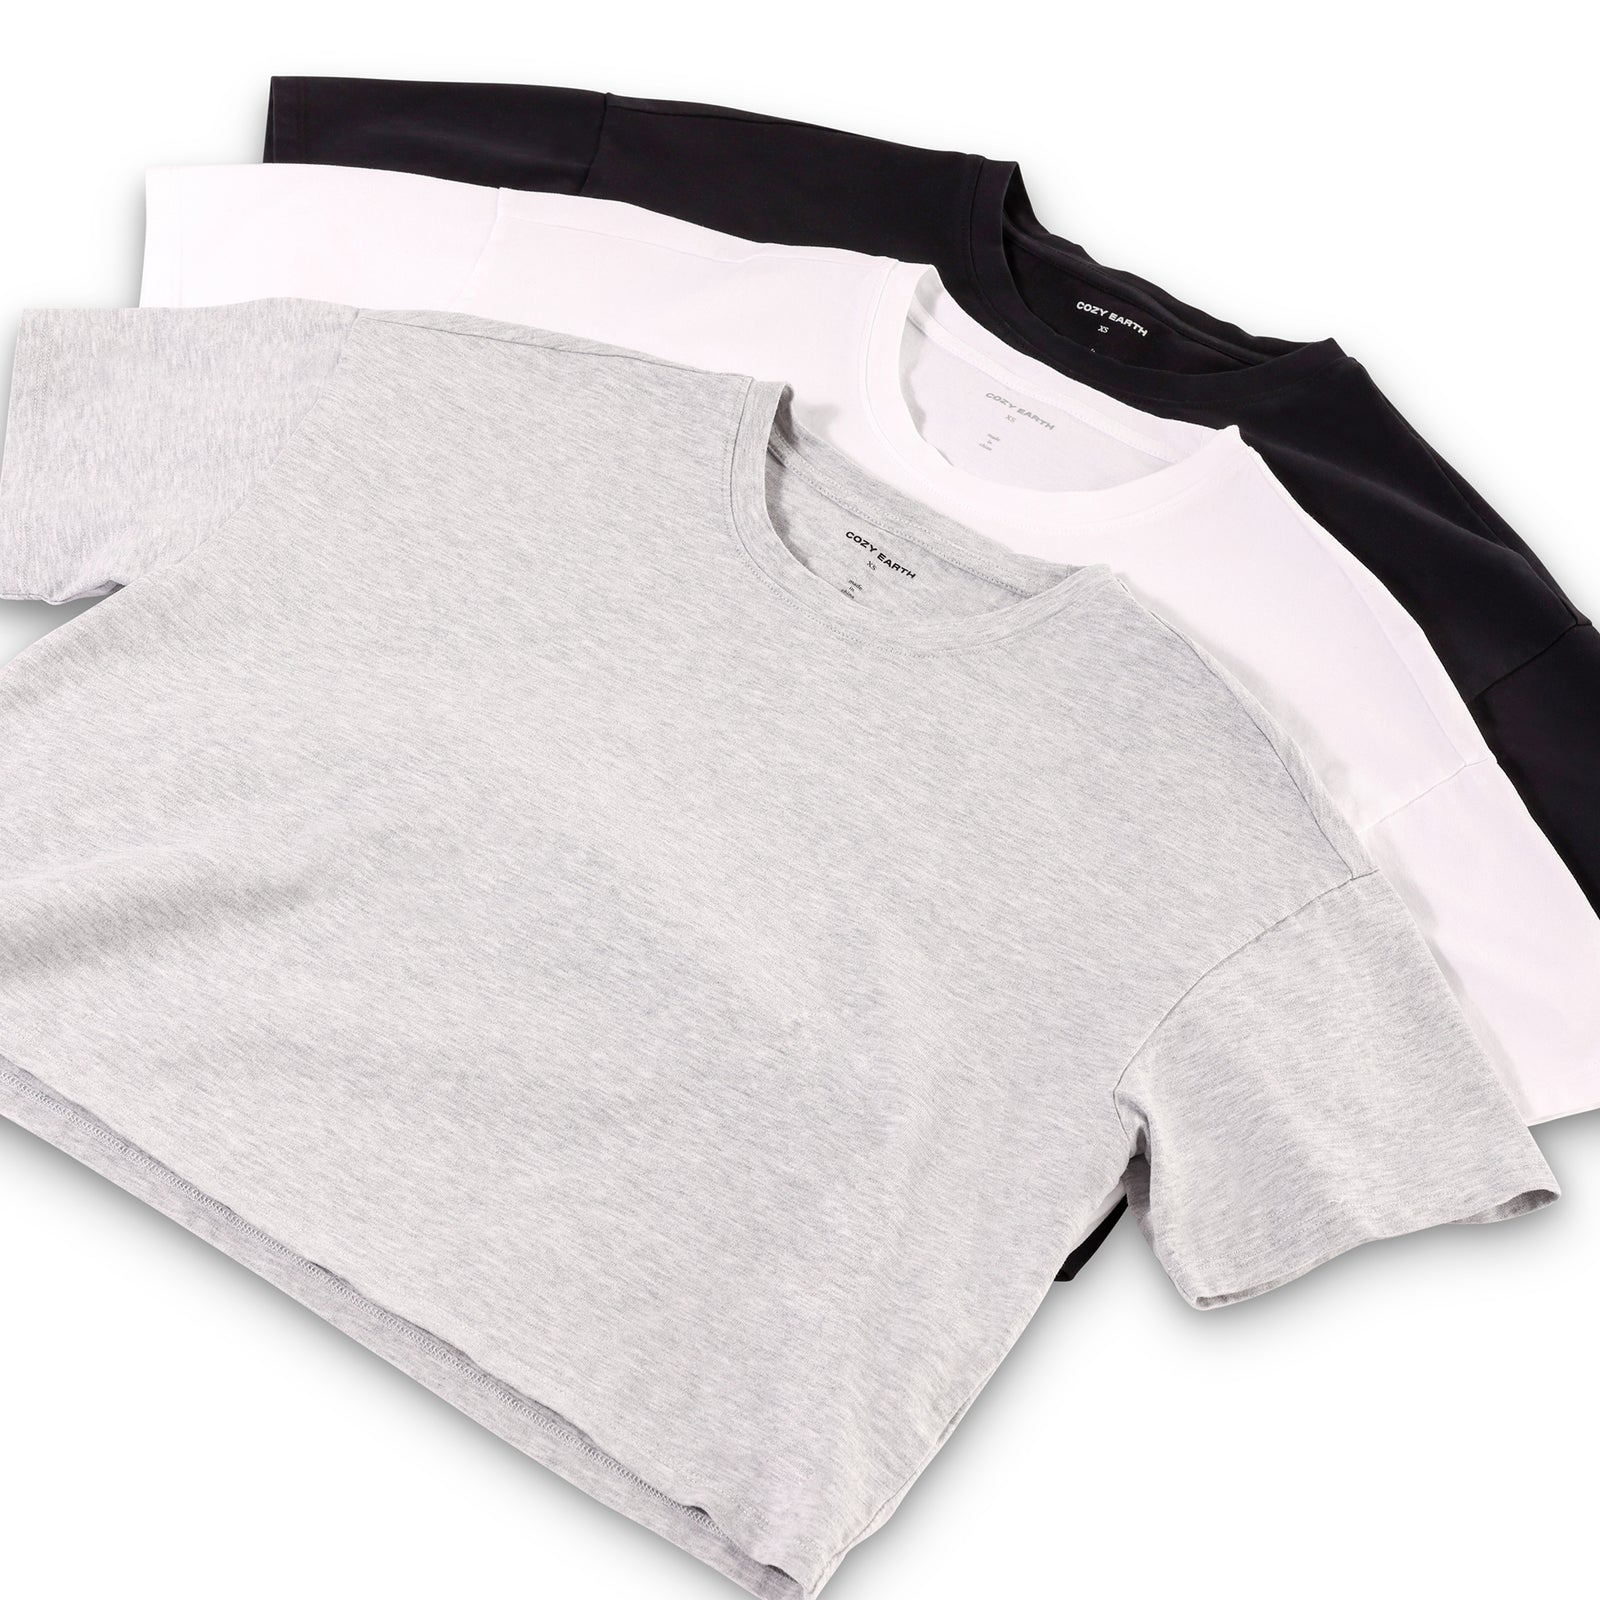 French Dove Heather, Jet Black, and White All Day Cropped Tees laying flat over a white background.